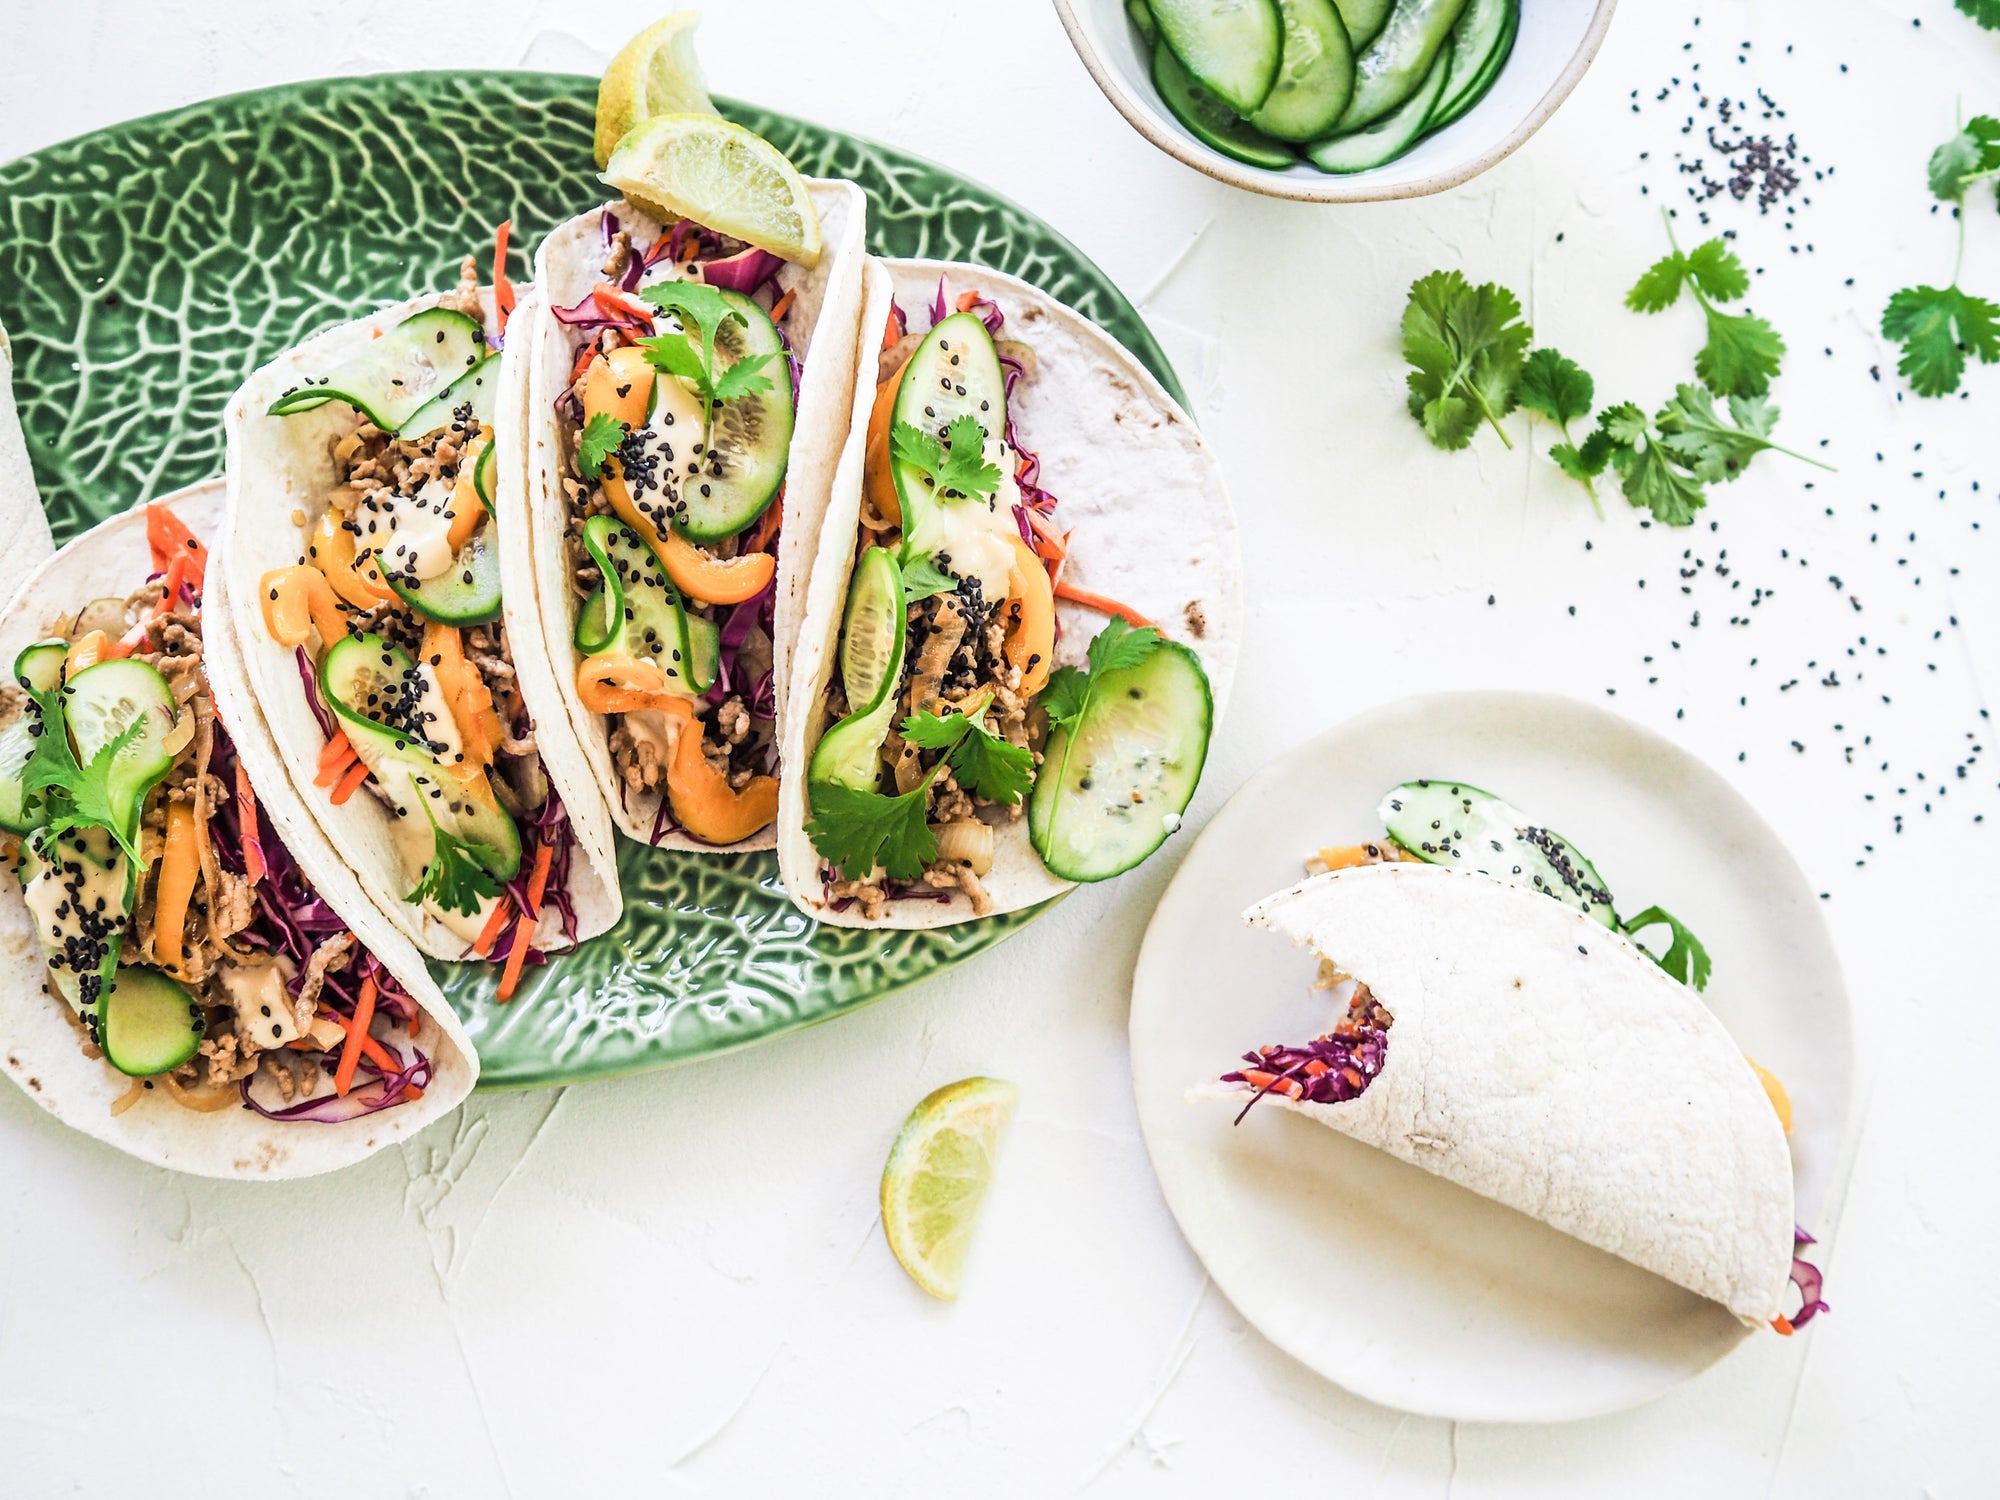 Sweet & Salty Pork Tacos with Pickled Cucumber, Slaw and Asian Mayo